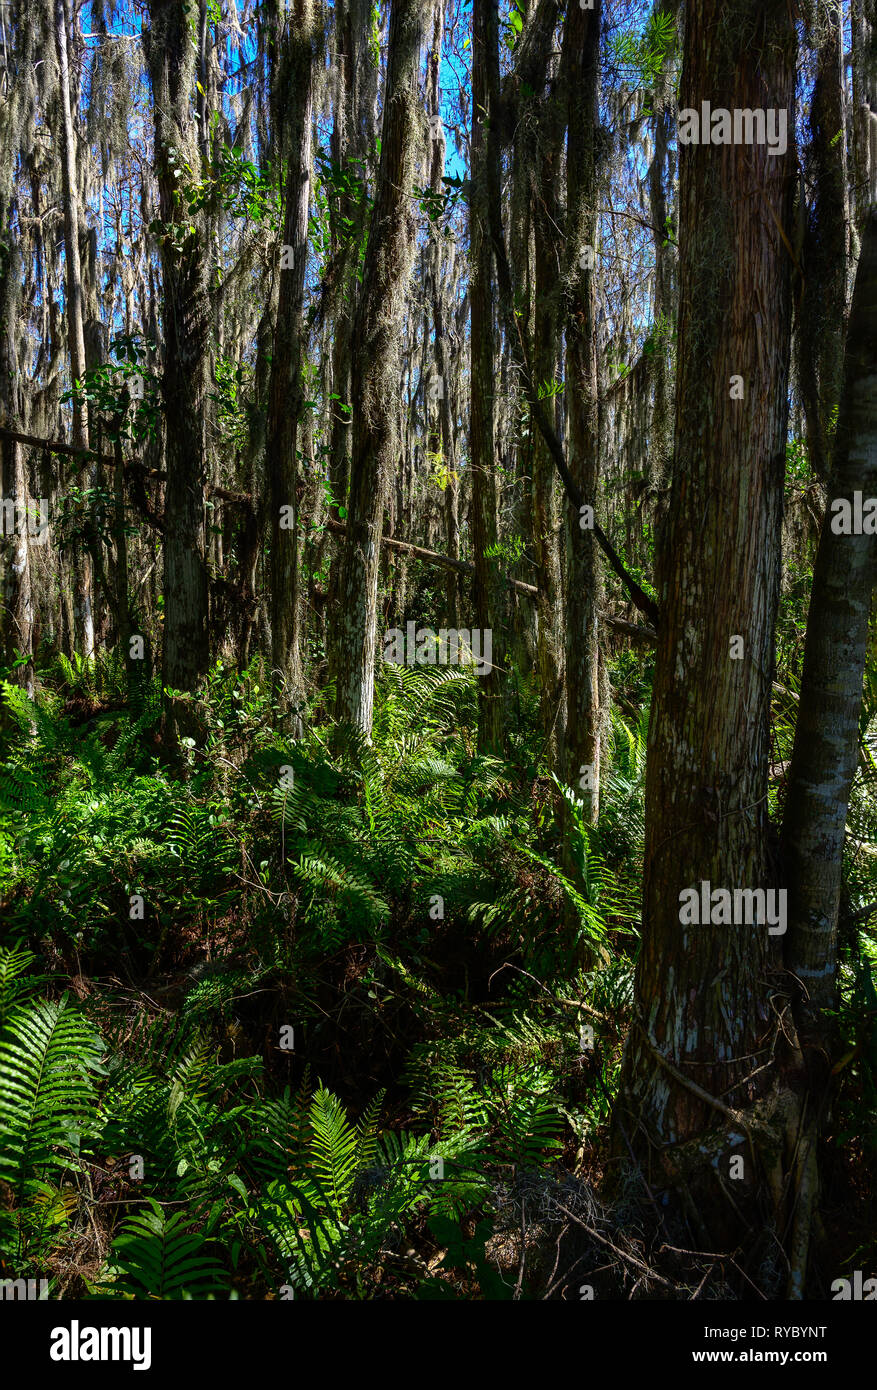 Tree Islands in the Cypress swamps at Loxahatchee National Wildlife Refuge with a variety of Ferns, including Swamp Fern, Strap Fern and Royal Fern Stock Photo